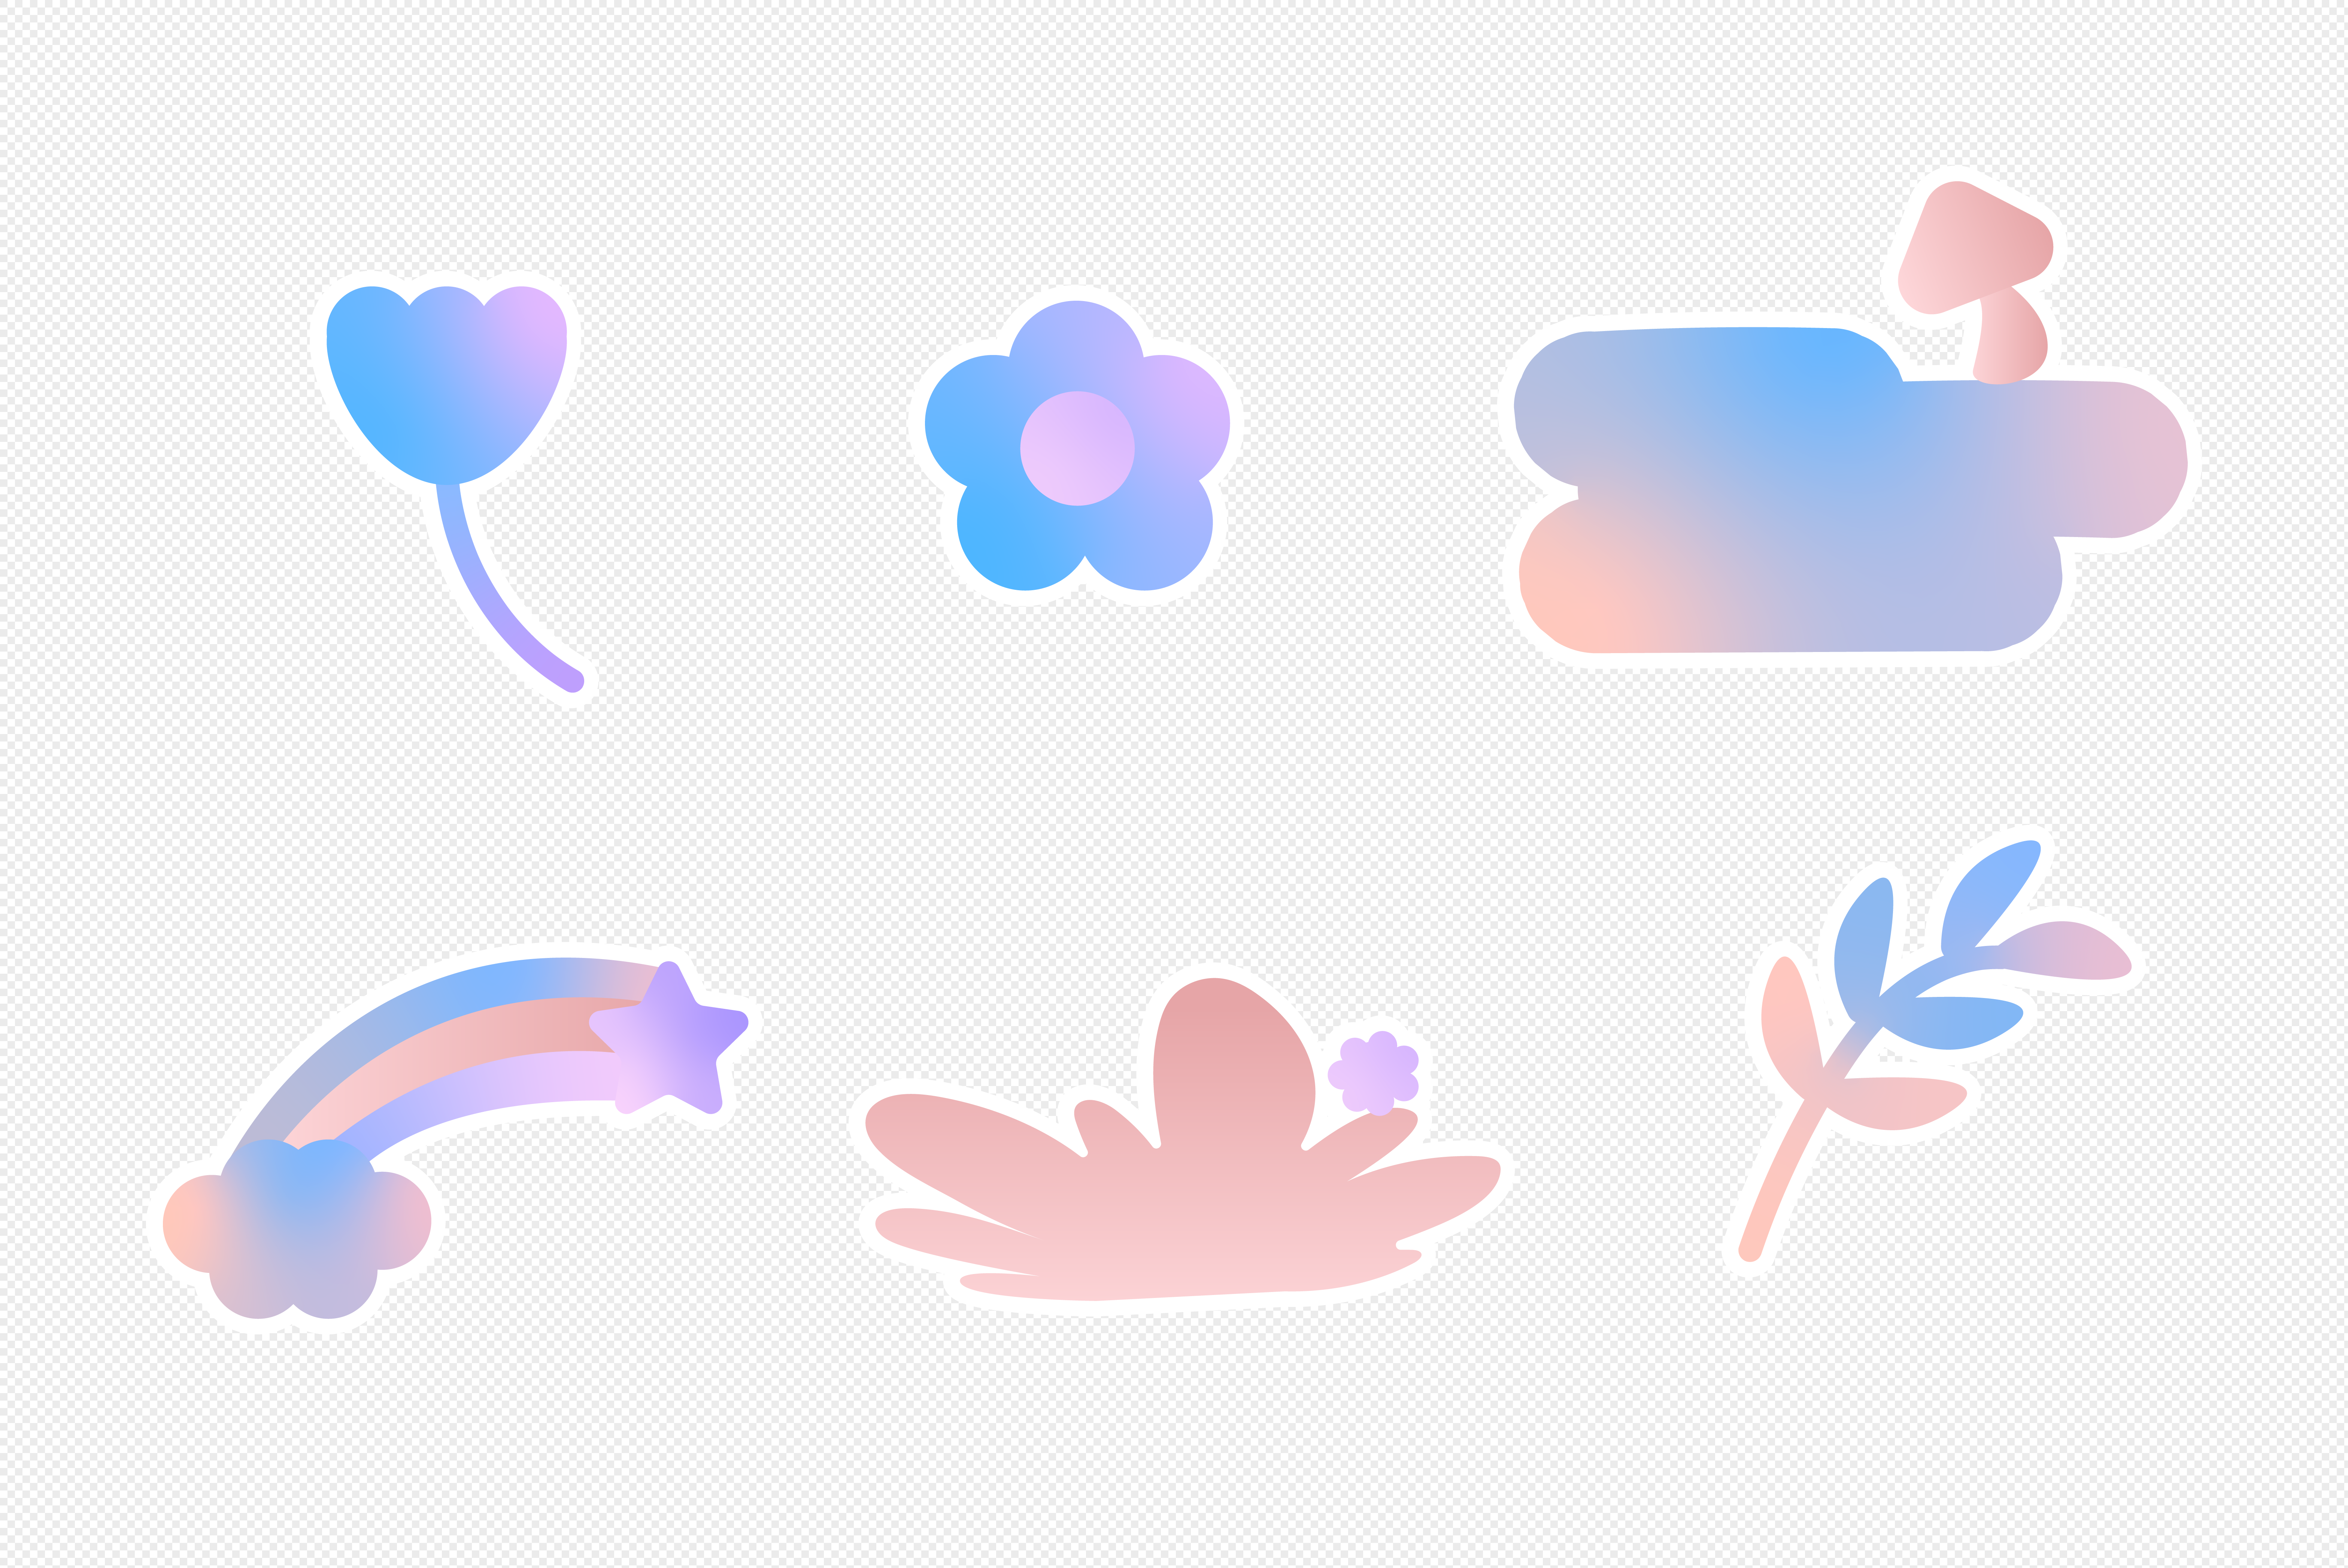 Cute Journal Stickers PNG Transparent Images Free Download, Vector Files